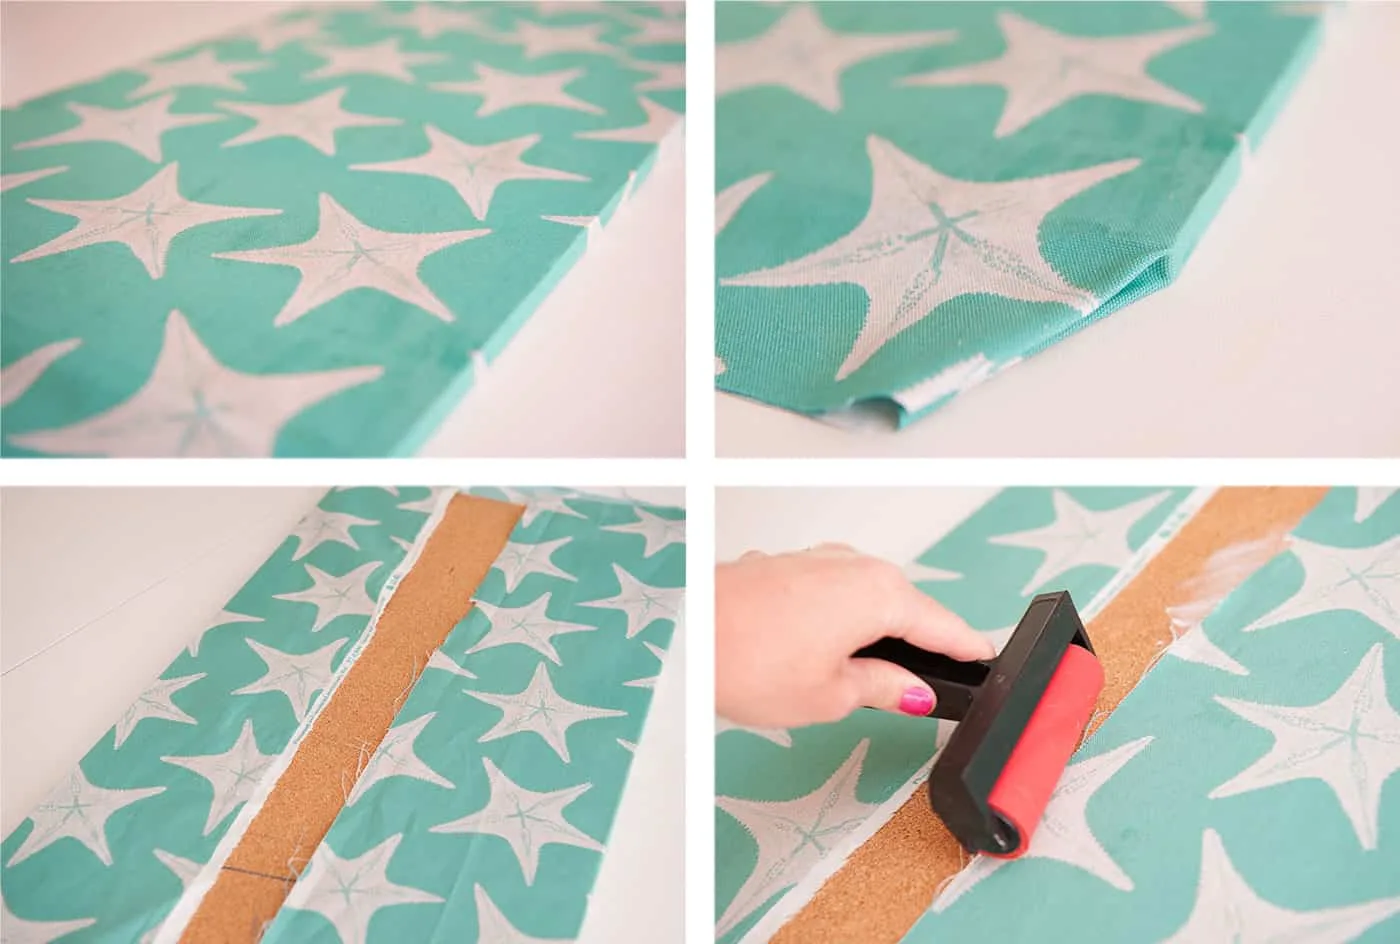 Wrapping the fabric around the corkboard and smoothing down with a brayer